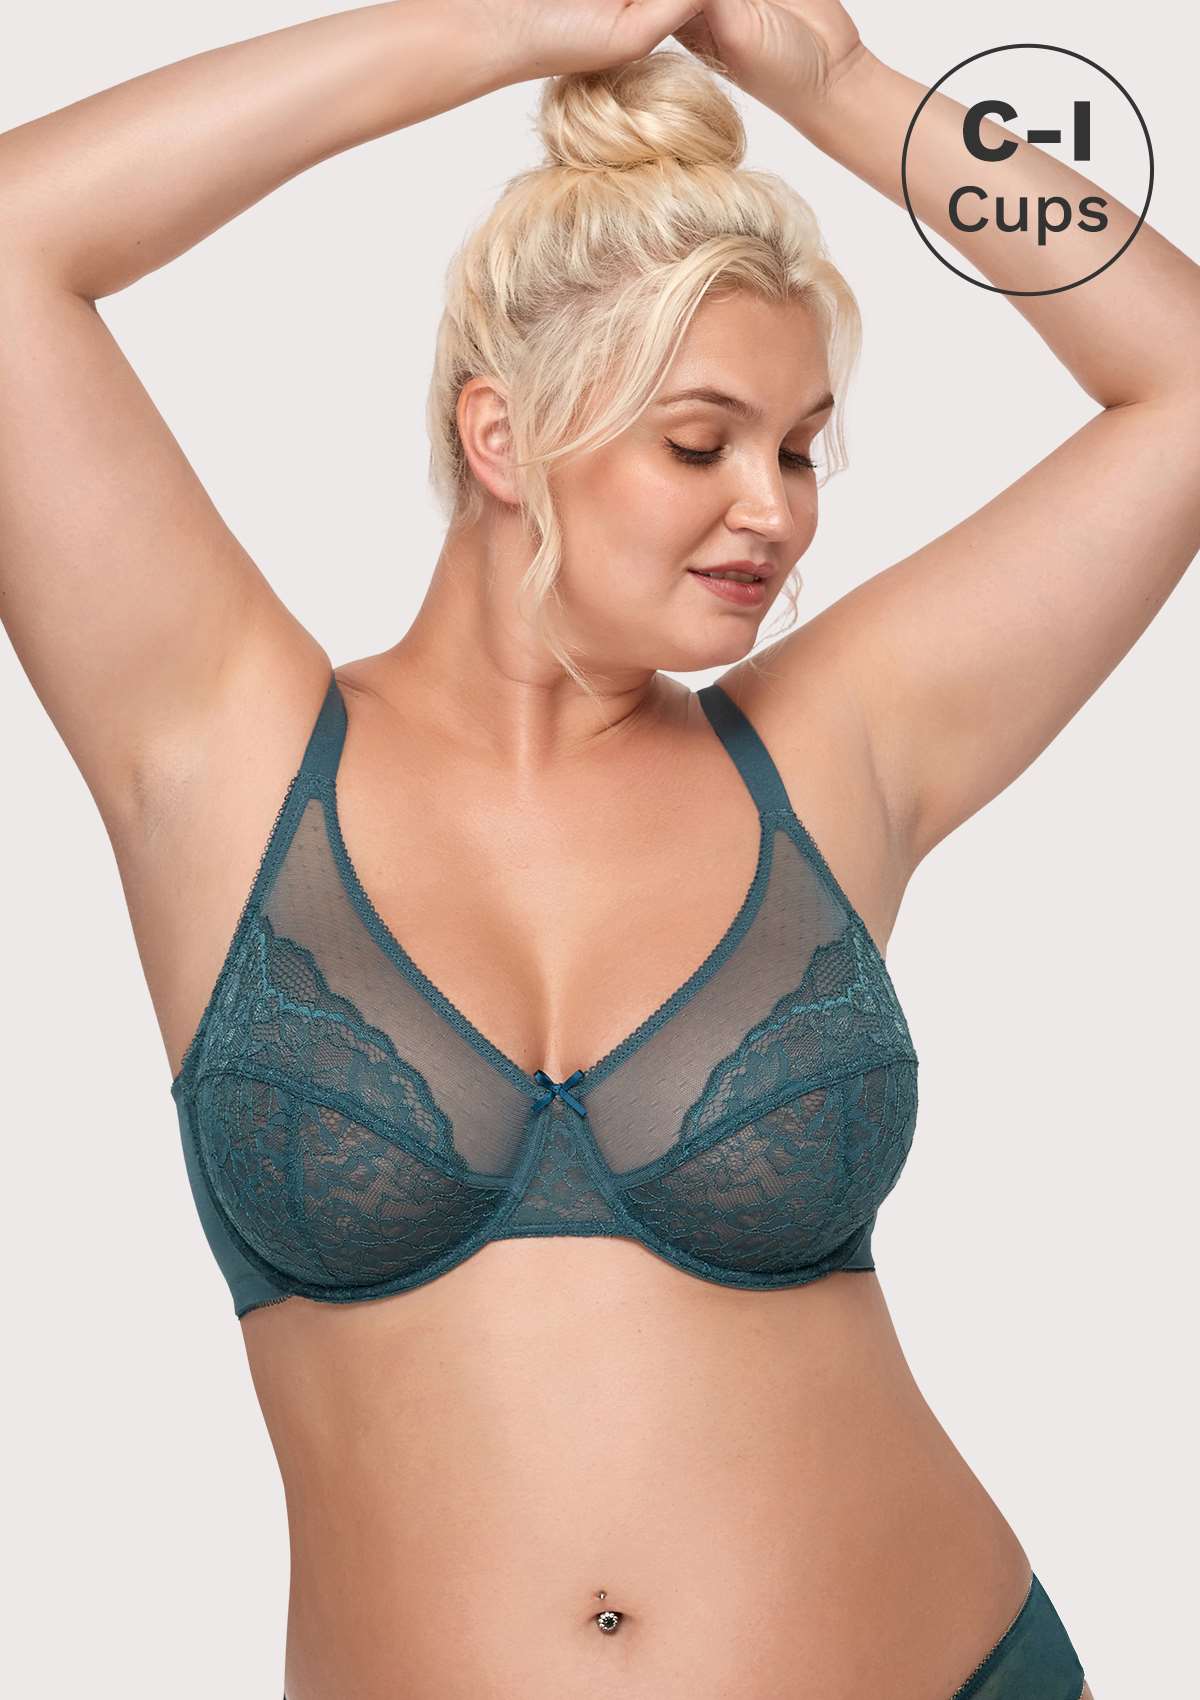 HSIA Enchante Full Coverage Bra: Supportive Bra For Big Busts - Royal Blue / 36 / C